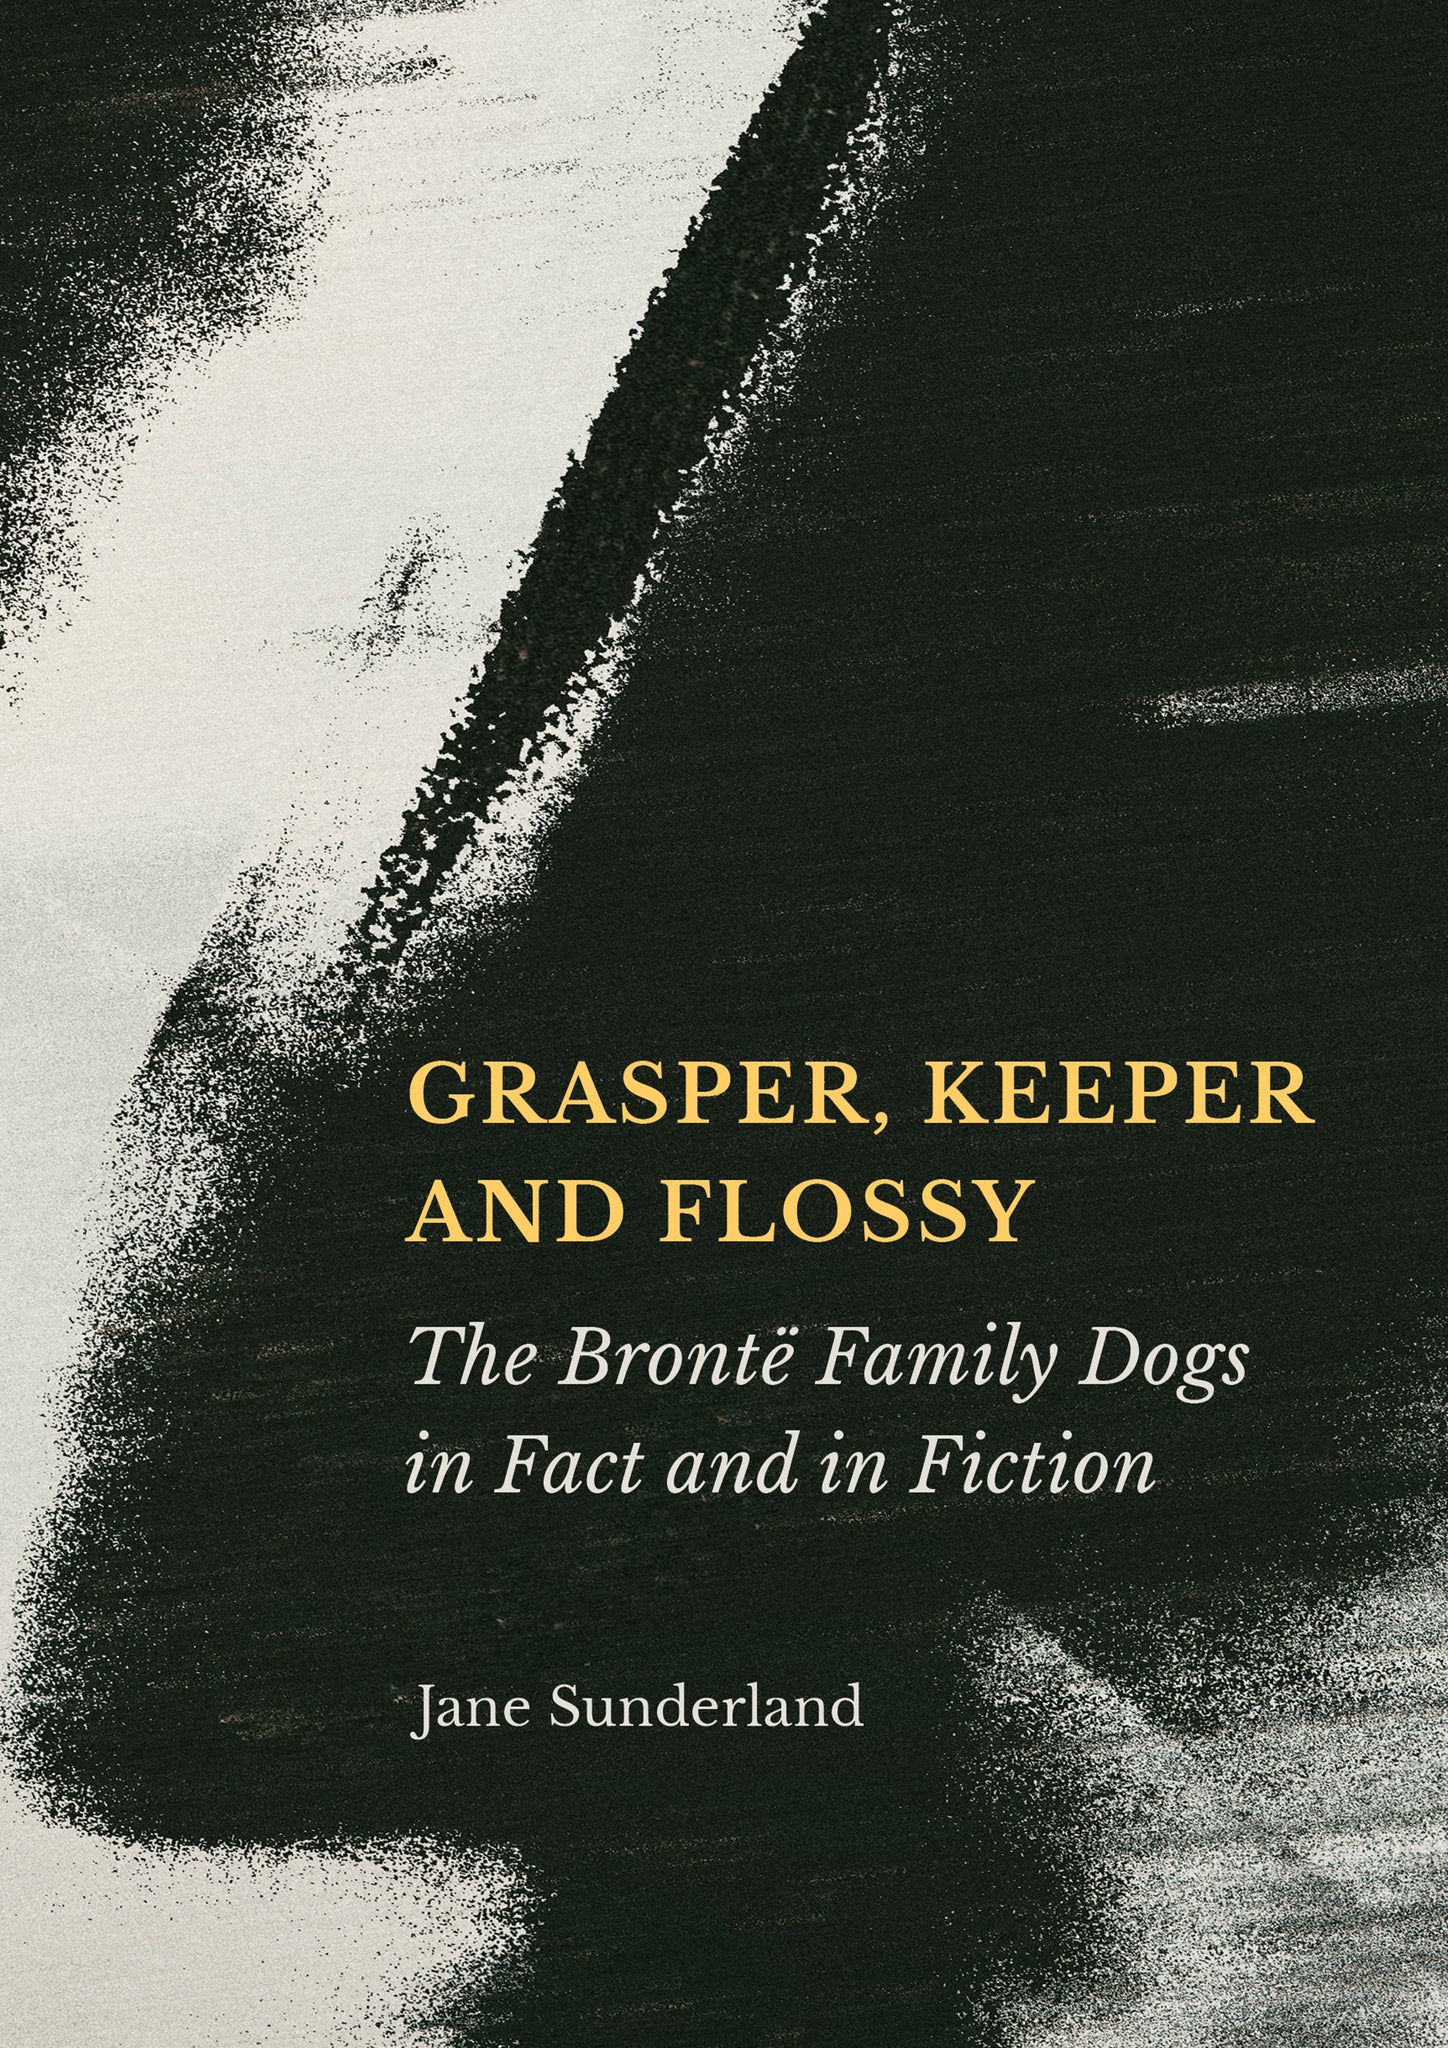 Grasper, Keeper and Flossy: The Brontë Family Dogs in Fact and in Fiction